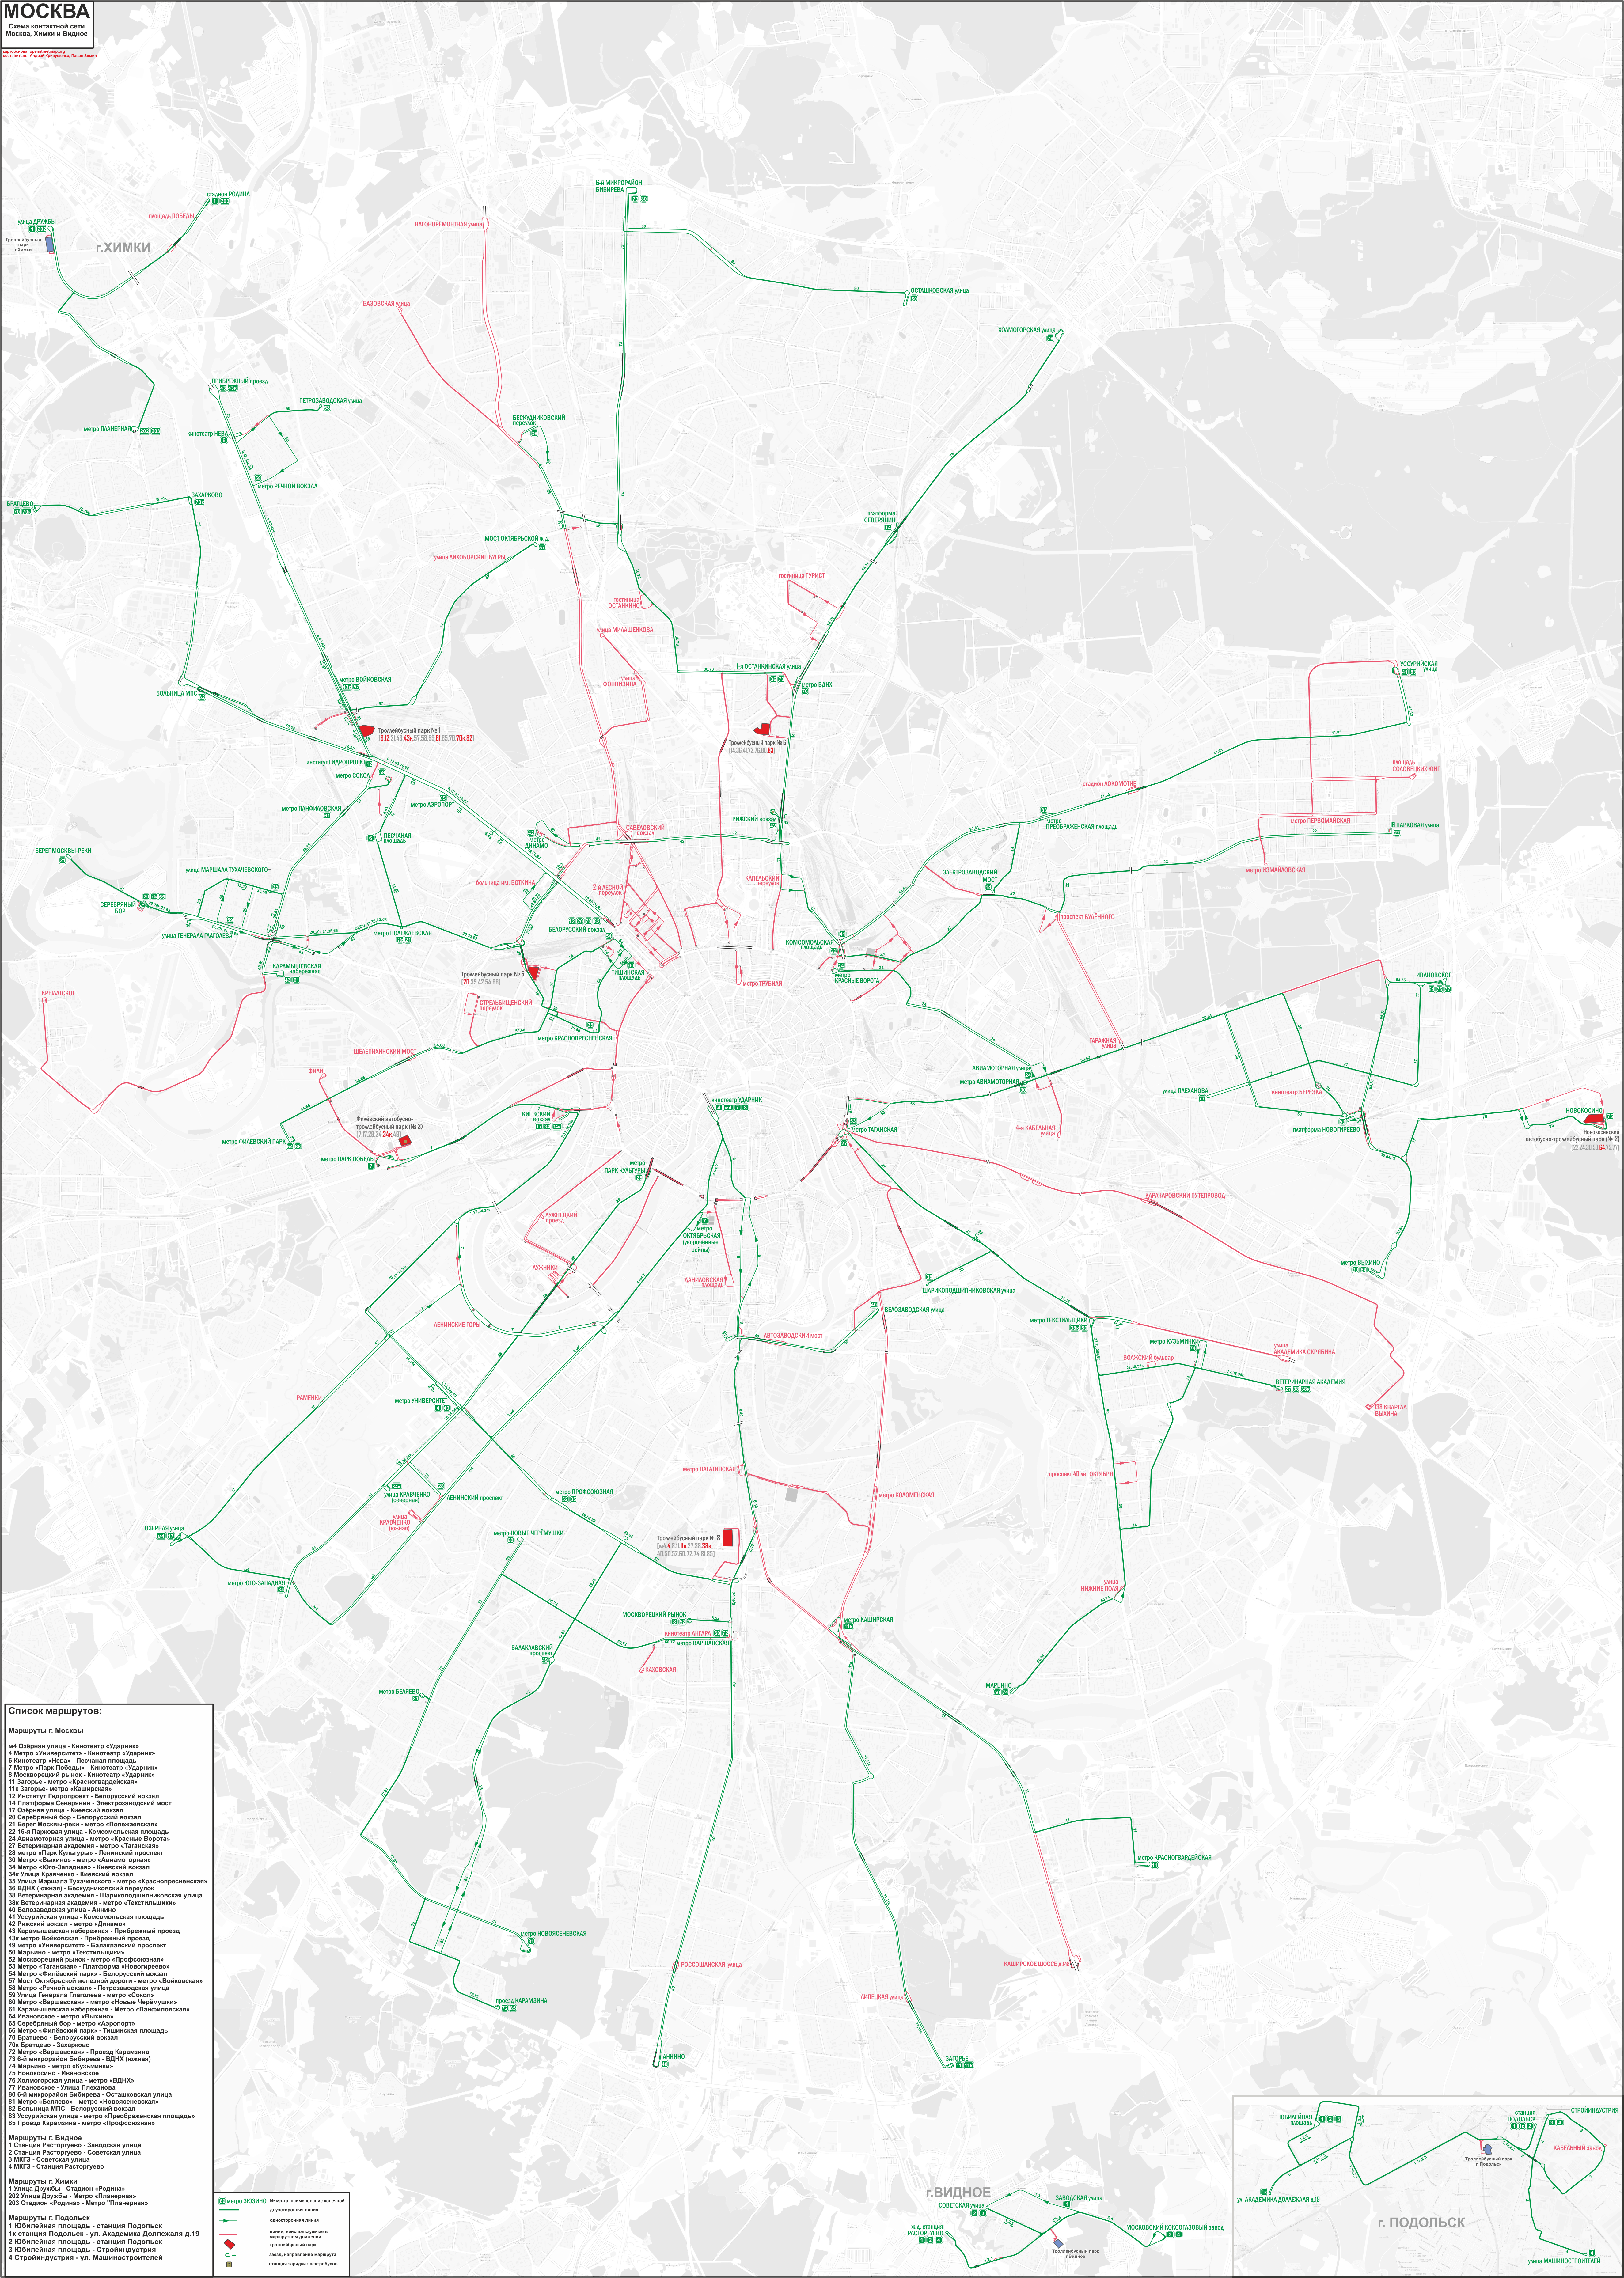 Moscow — Citywide Maps; Moscow — Tramway and Trolleybus Infrastructure Maps